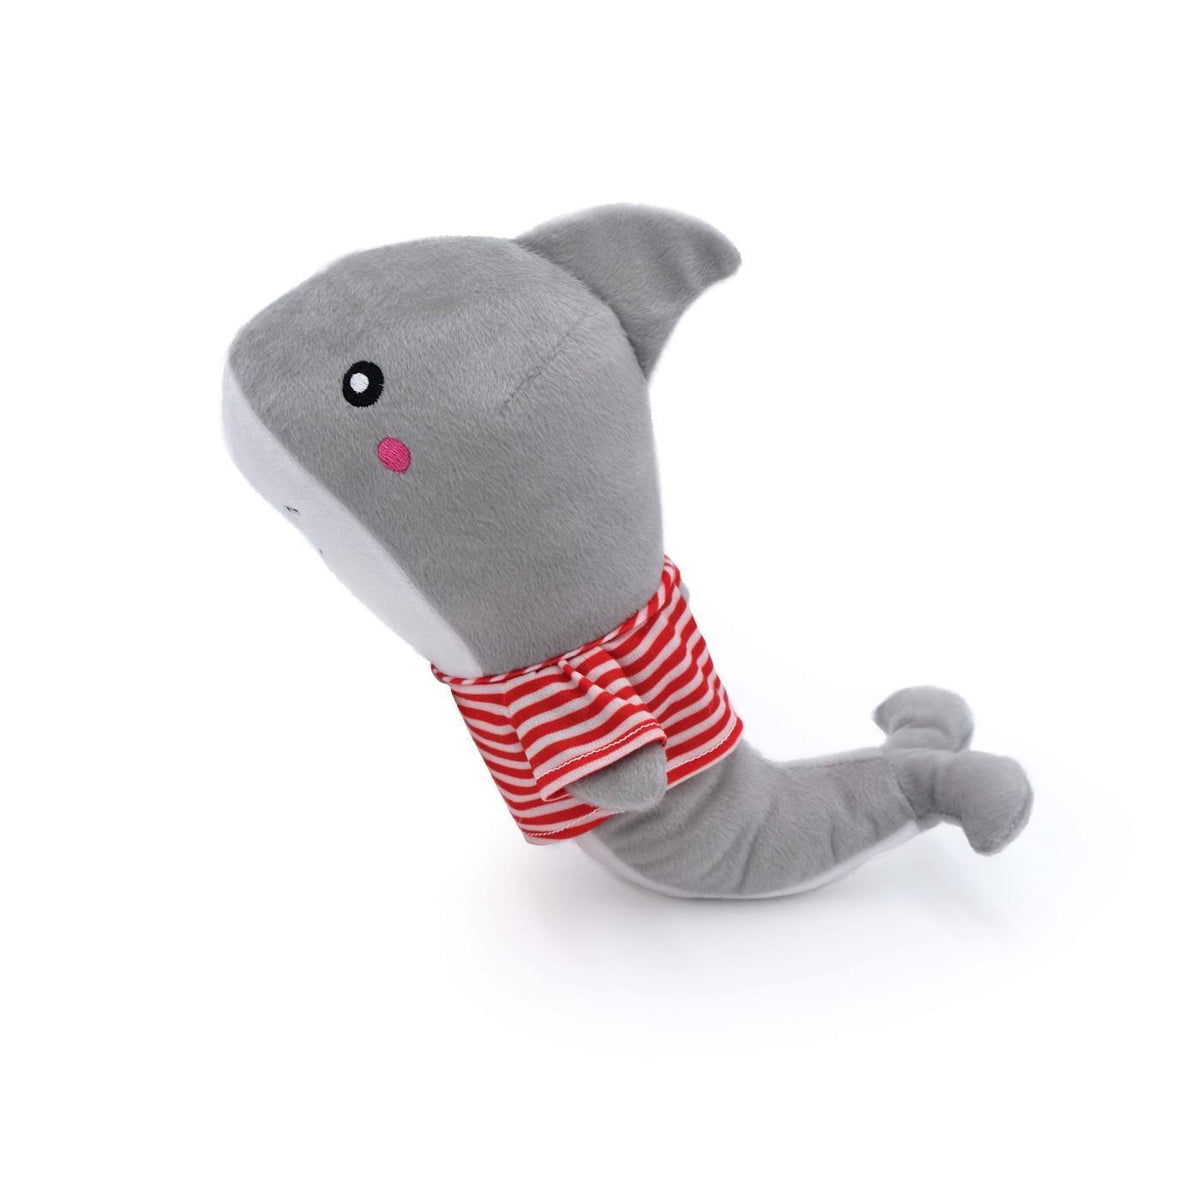 Shelby the Shark Squeaky Plush Dog Toy